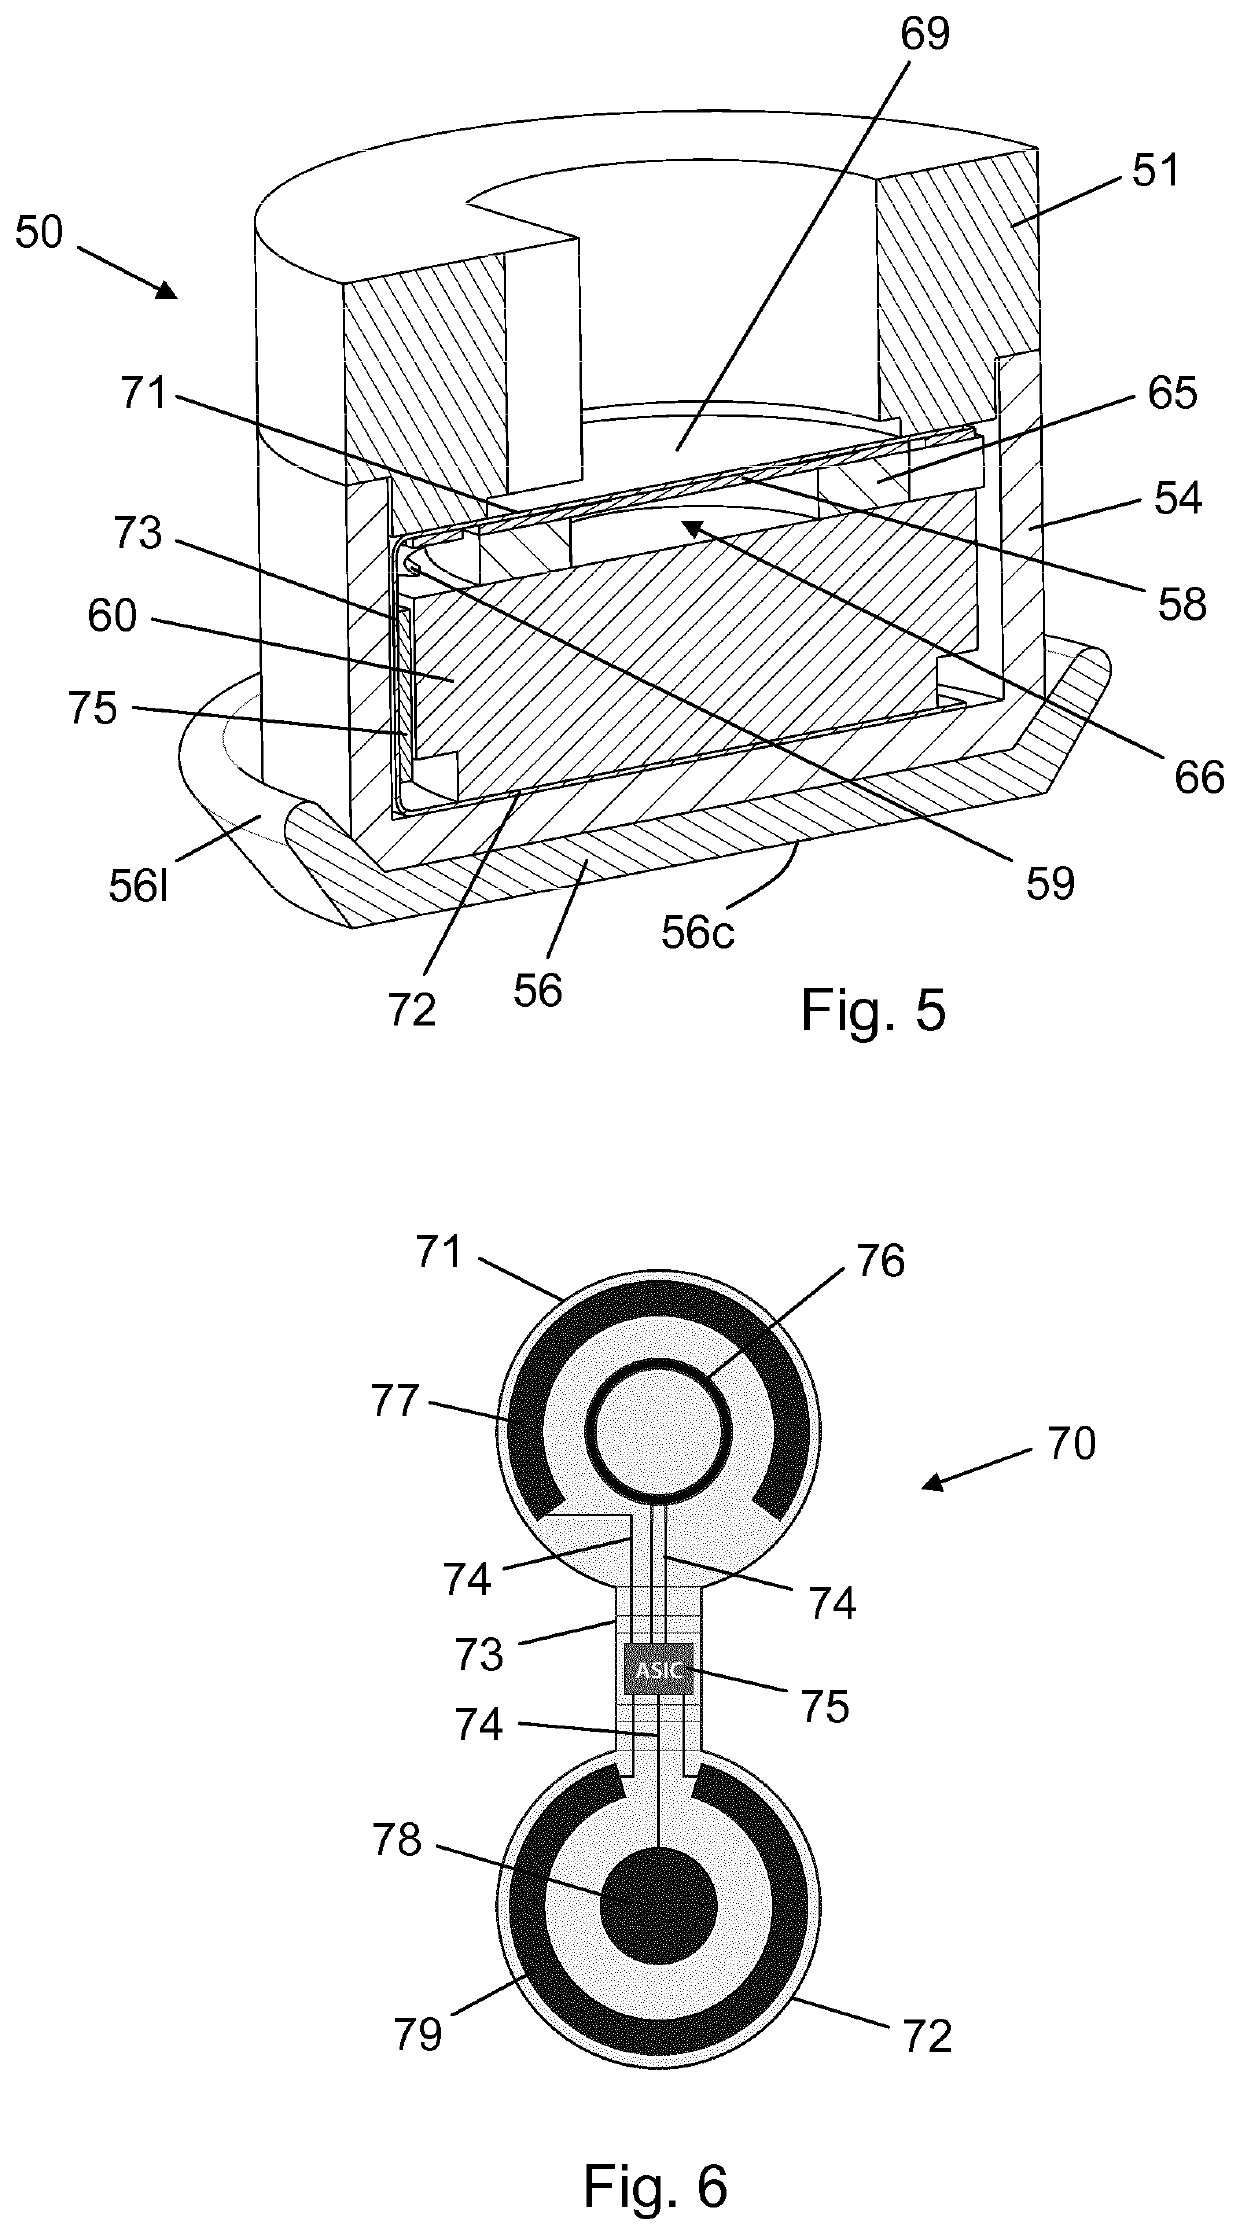 Injection device with means for determining expelled dose